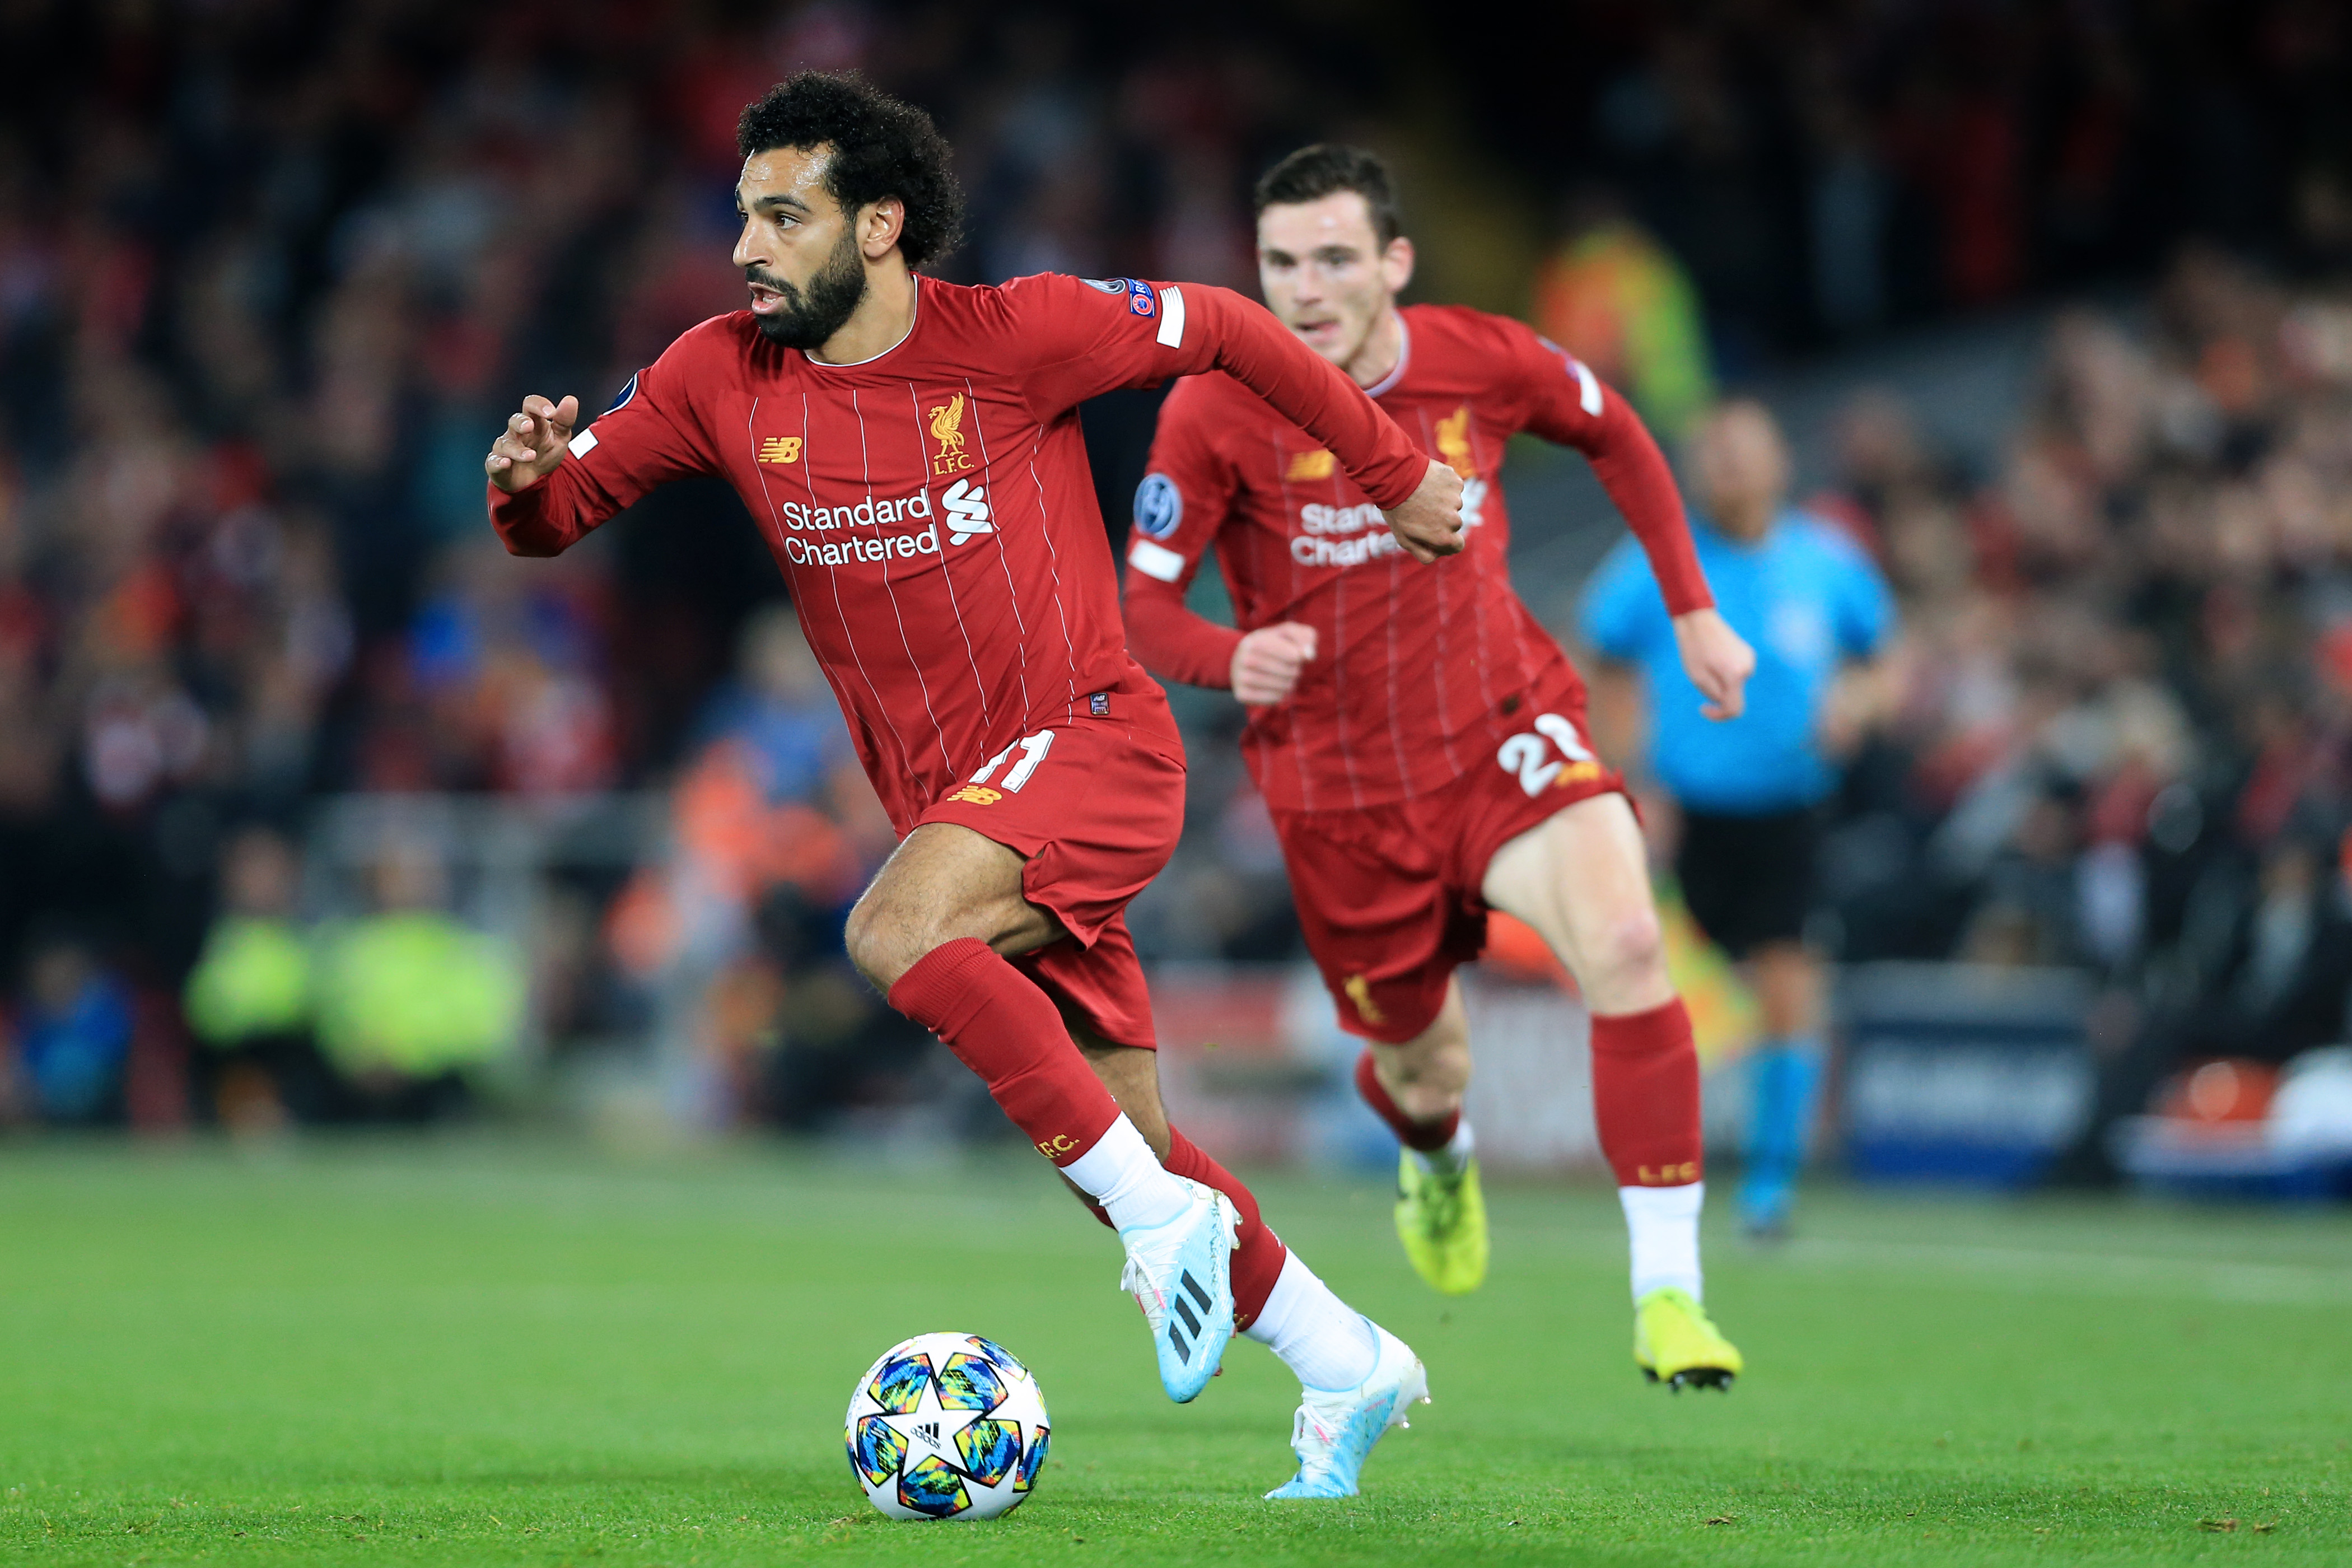 Mohamed Salah in action with the ball, trailed by Andrew Robertson - Liverpool FC - Premier League